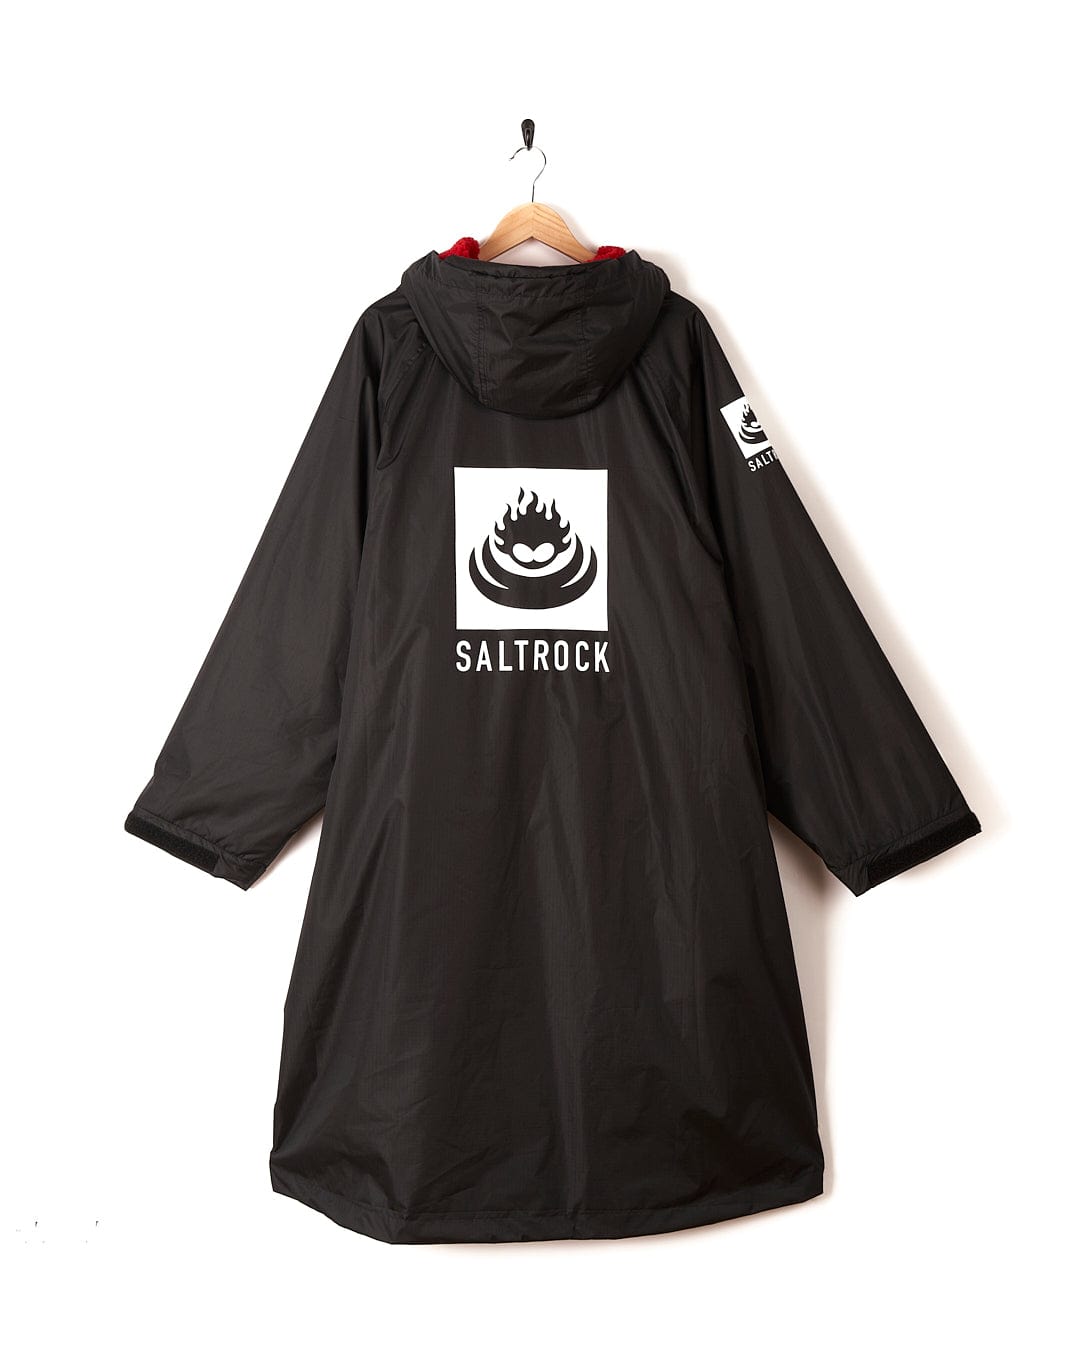 A Four Seasons Waterproof Changing Robe by Saltrock - Black/Red with a red logo on it.